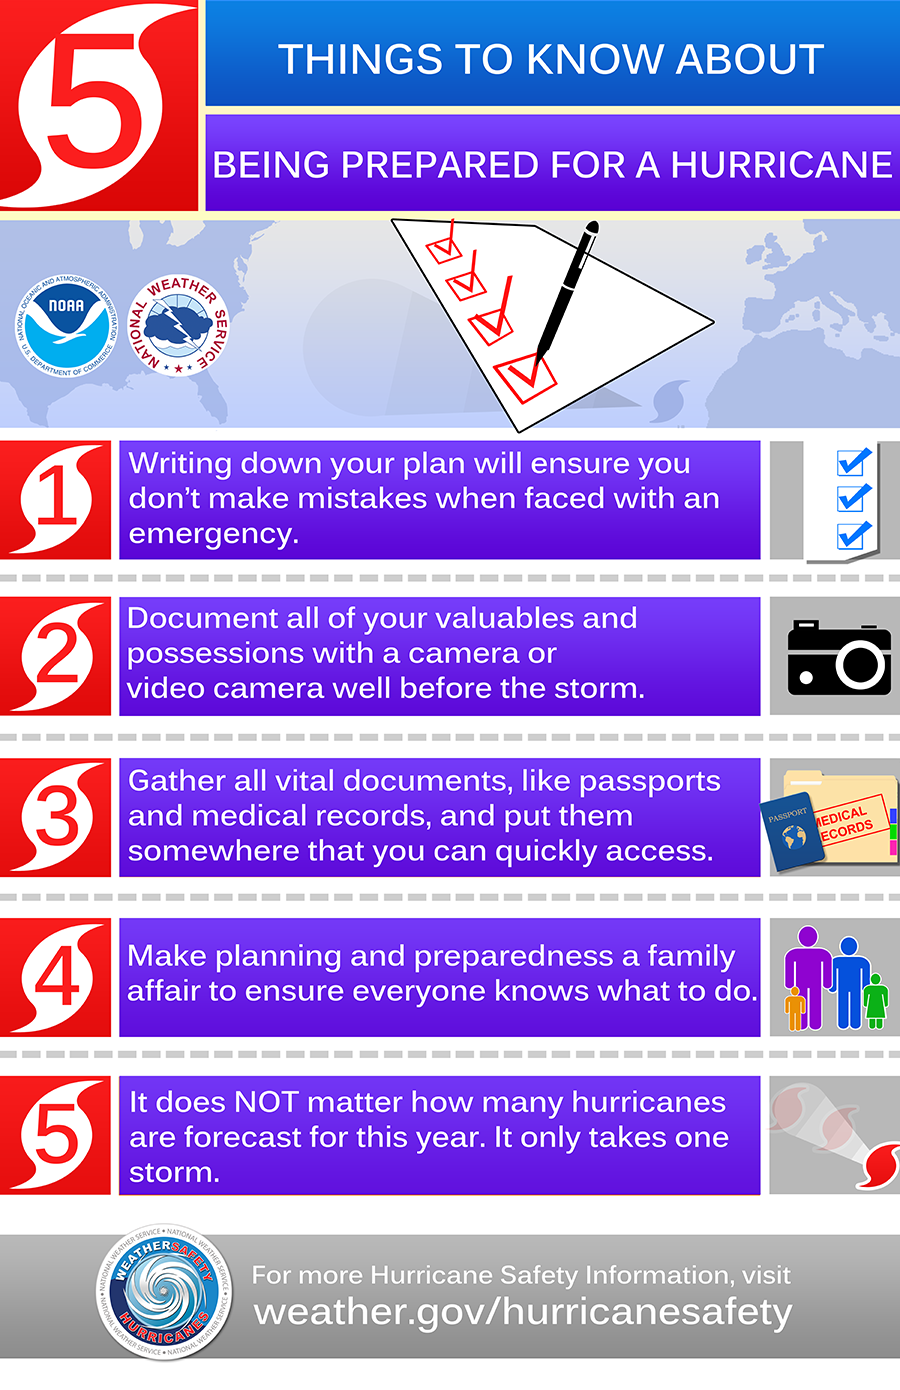 Things to know about being prepared for a hurricane